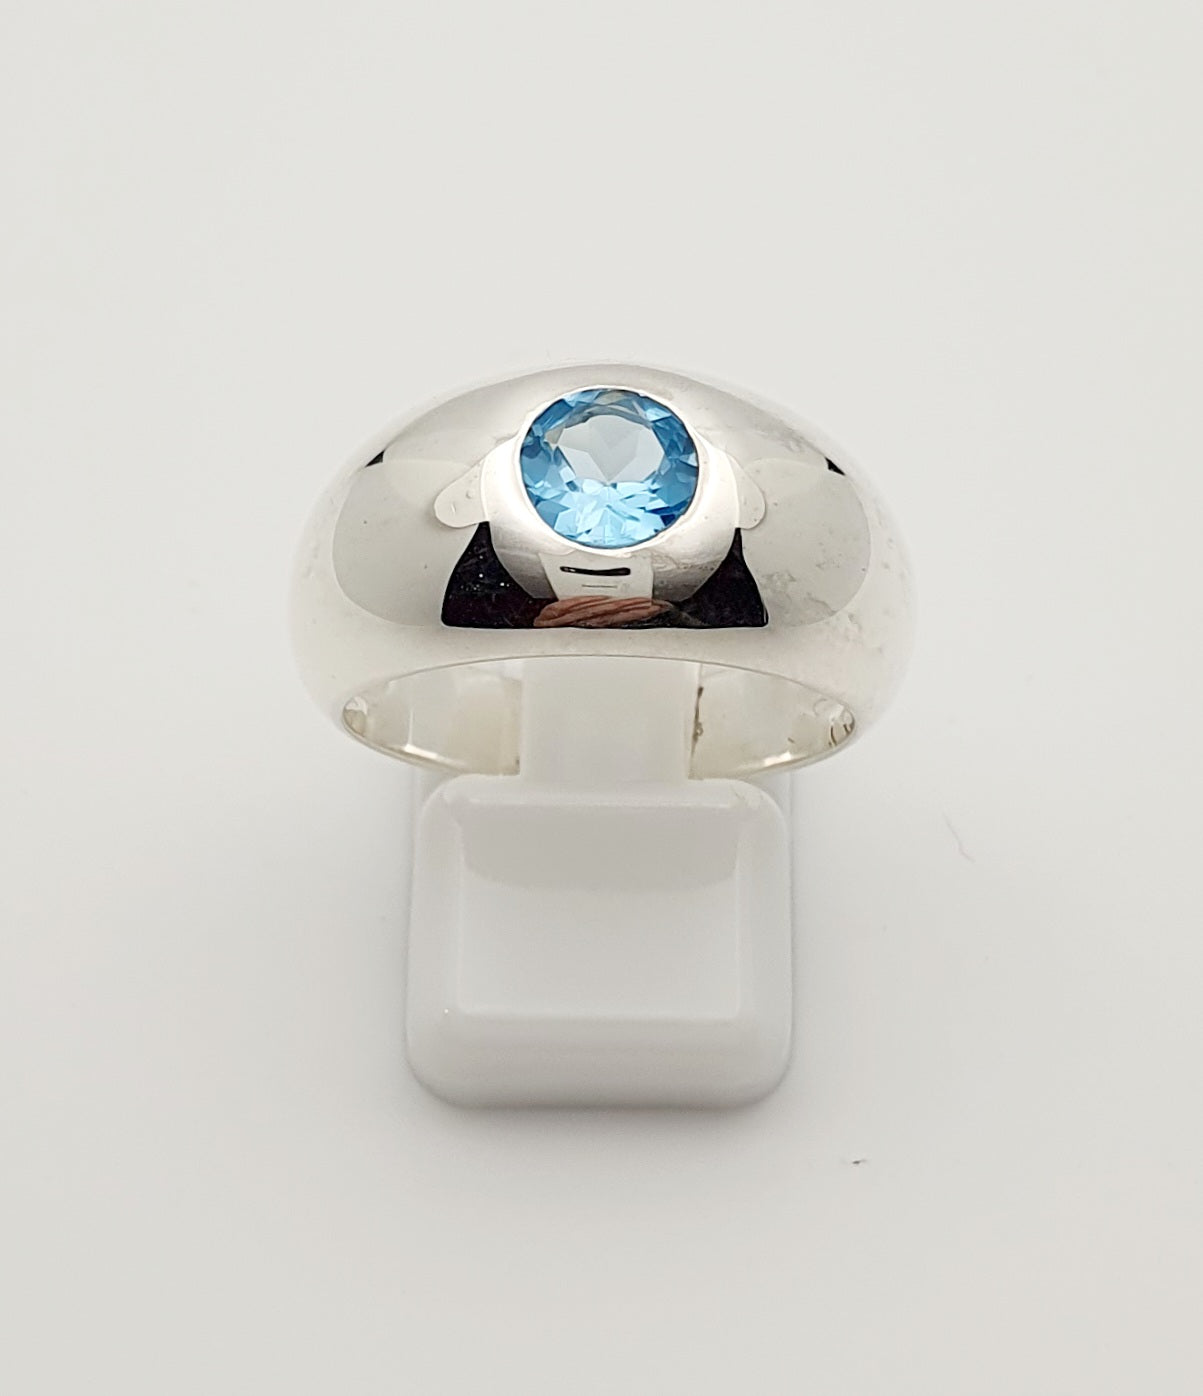 12mm Silver Domed Ring With 6mm Flush-Set Blue Topaz Medium (Cannot Resize)